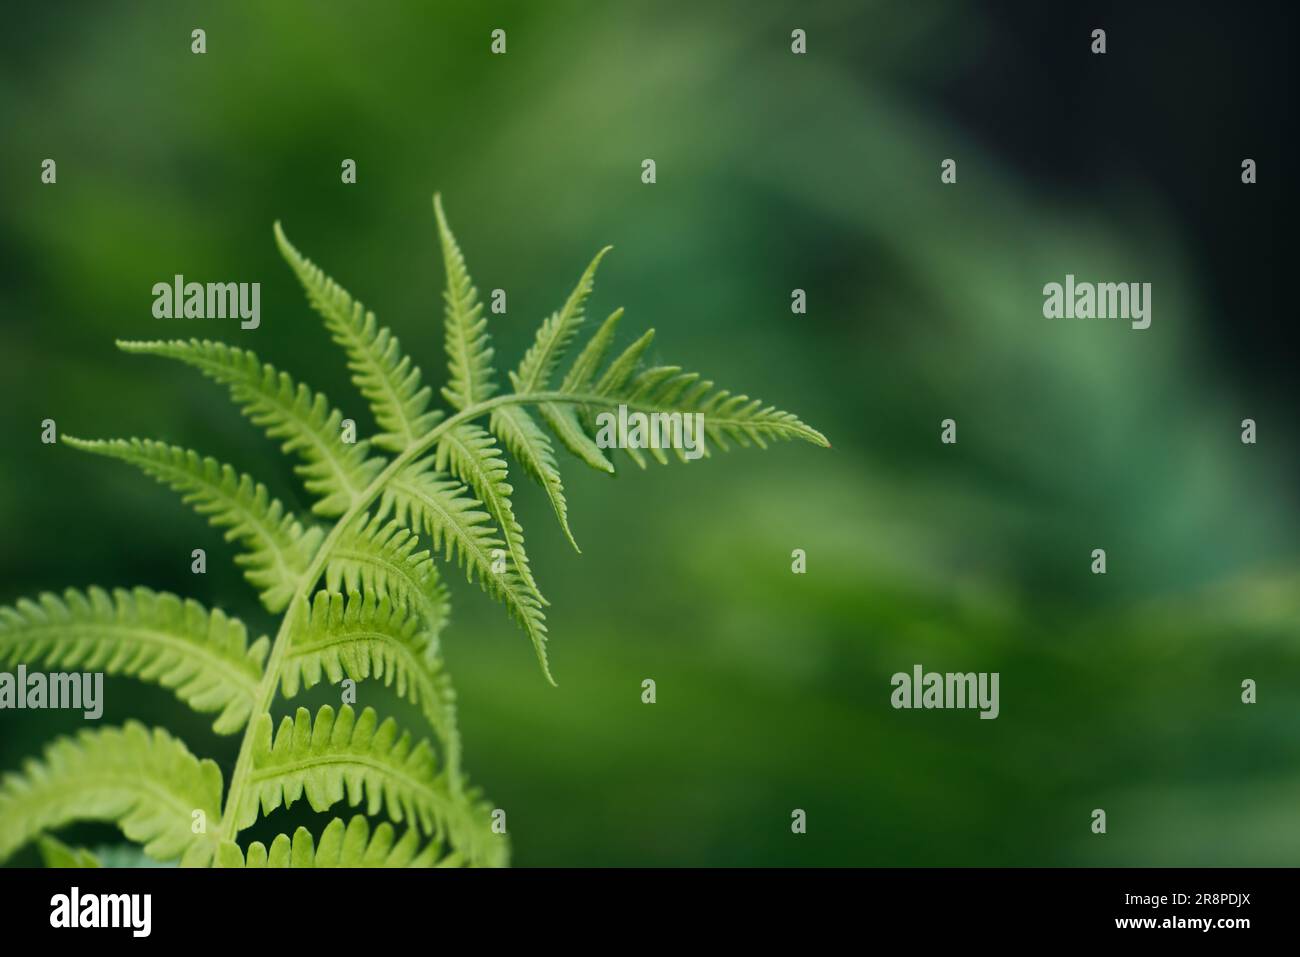 green fern leaves petals background. Vibrant green foliage. Tropical leaf. Exotic forest plant. Botany concept. Ferns jungles close up. jungle atmosphere and calm zen meditation Stock Photo